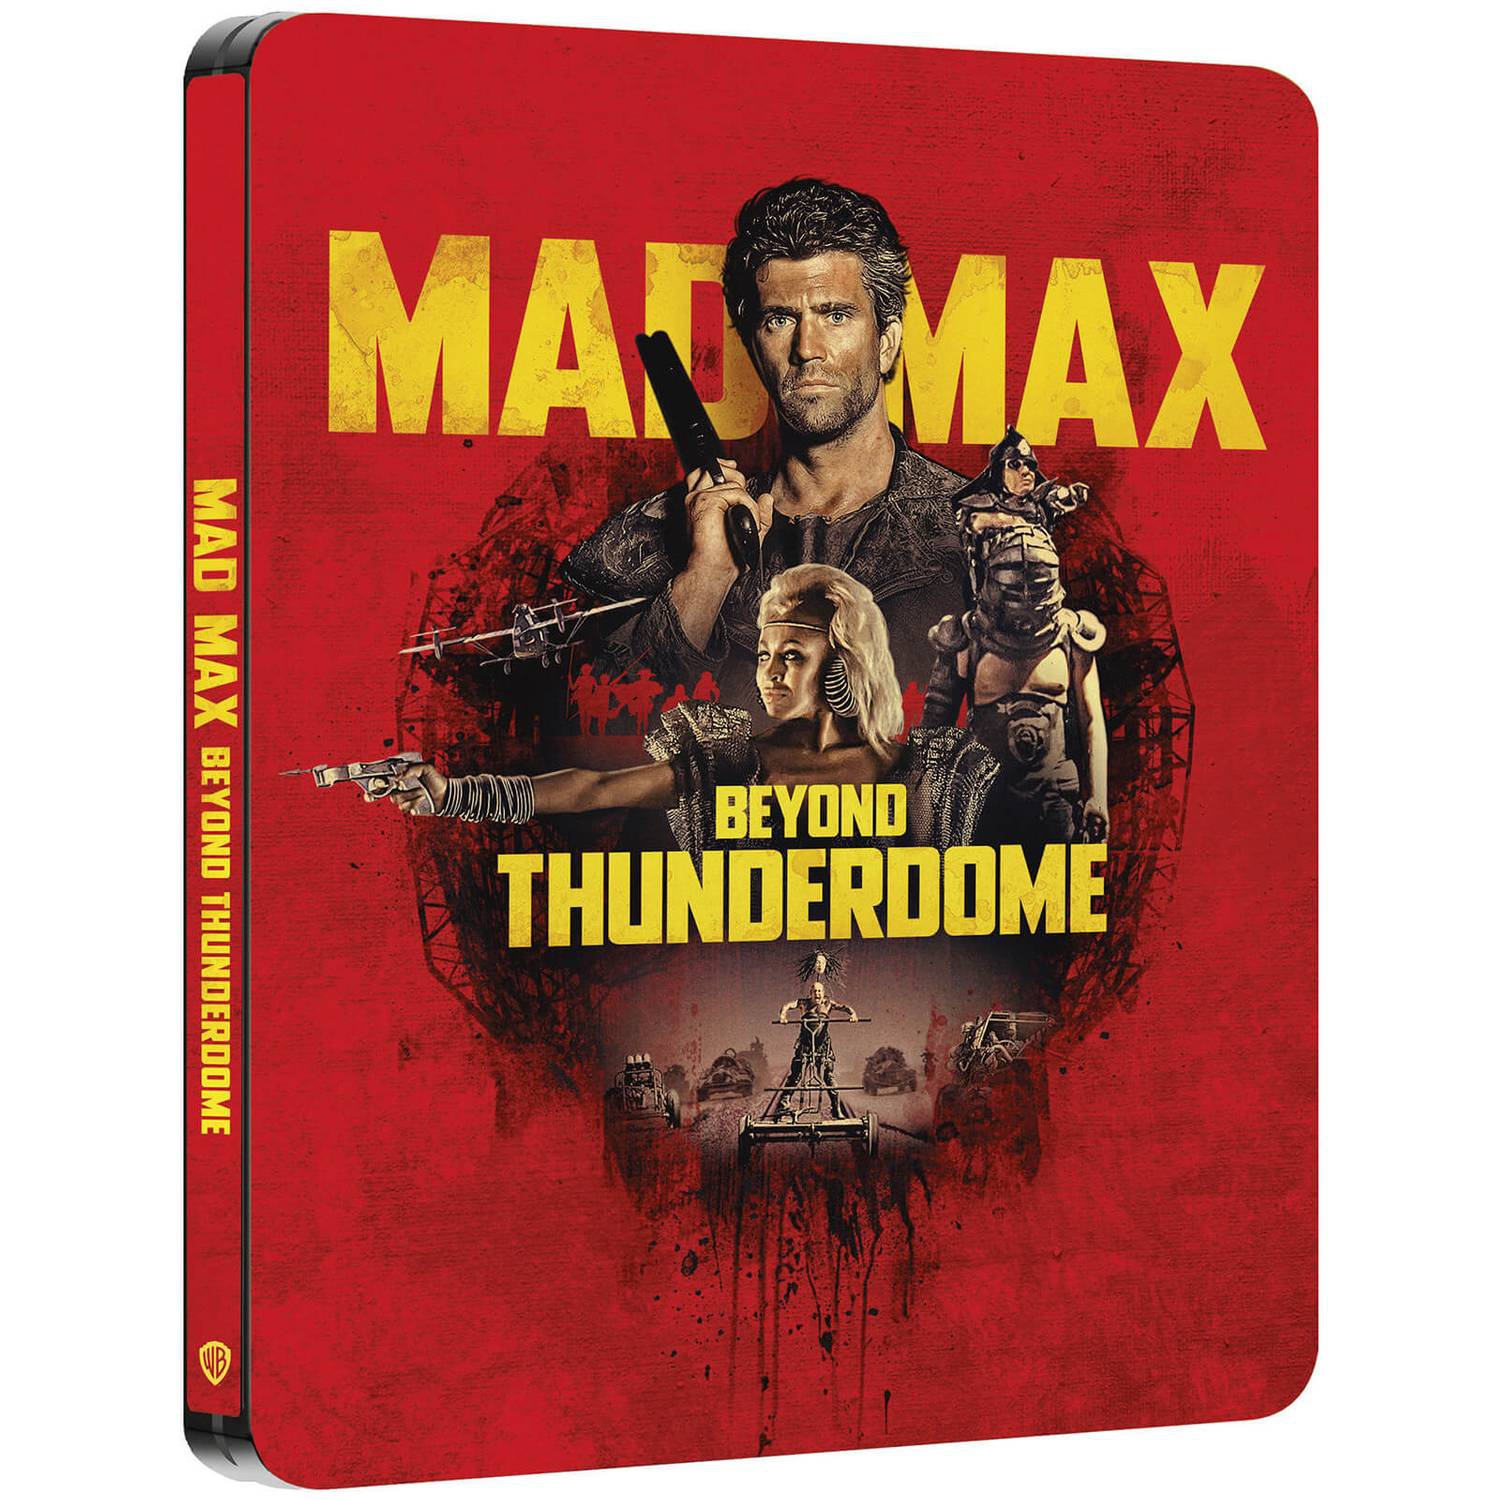 MAD MAX Anthology in METAL LIBRARY BOX Steelbook™ Limited Collector's  Edition Gift Set (4 4K Ultra HD + 5 Blu-ray)